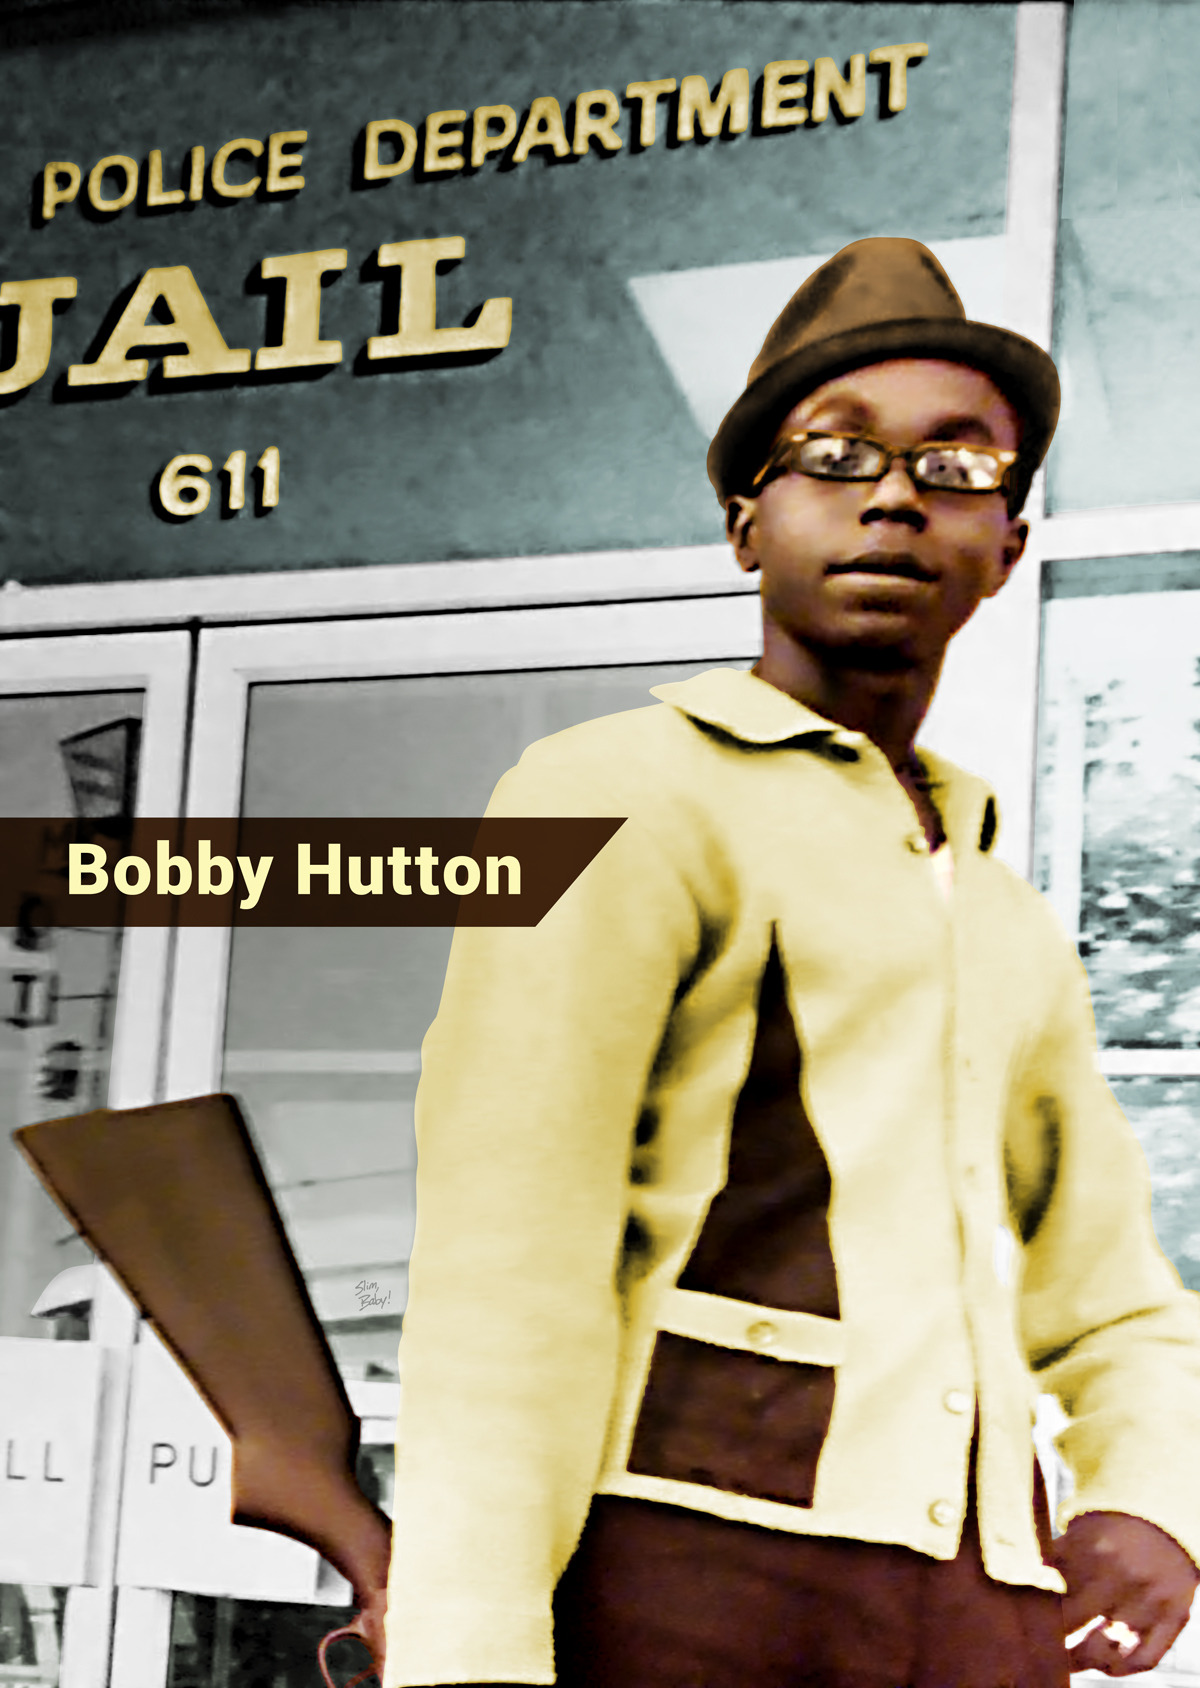 Bobby Hutton, killed in 1968 by the Oakland Police.